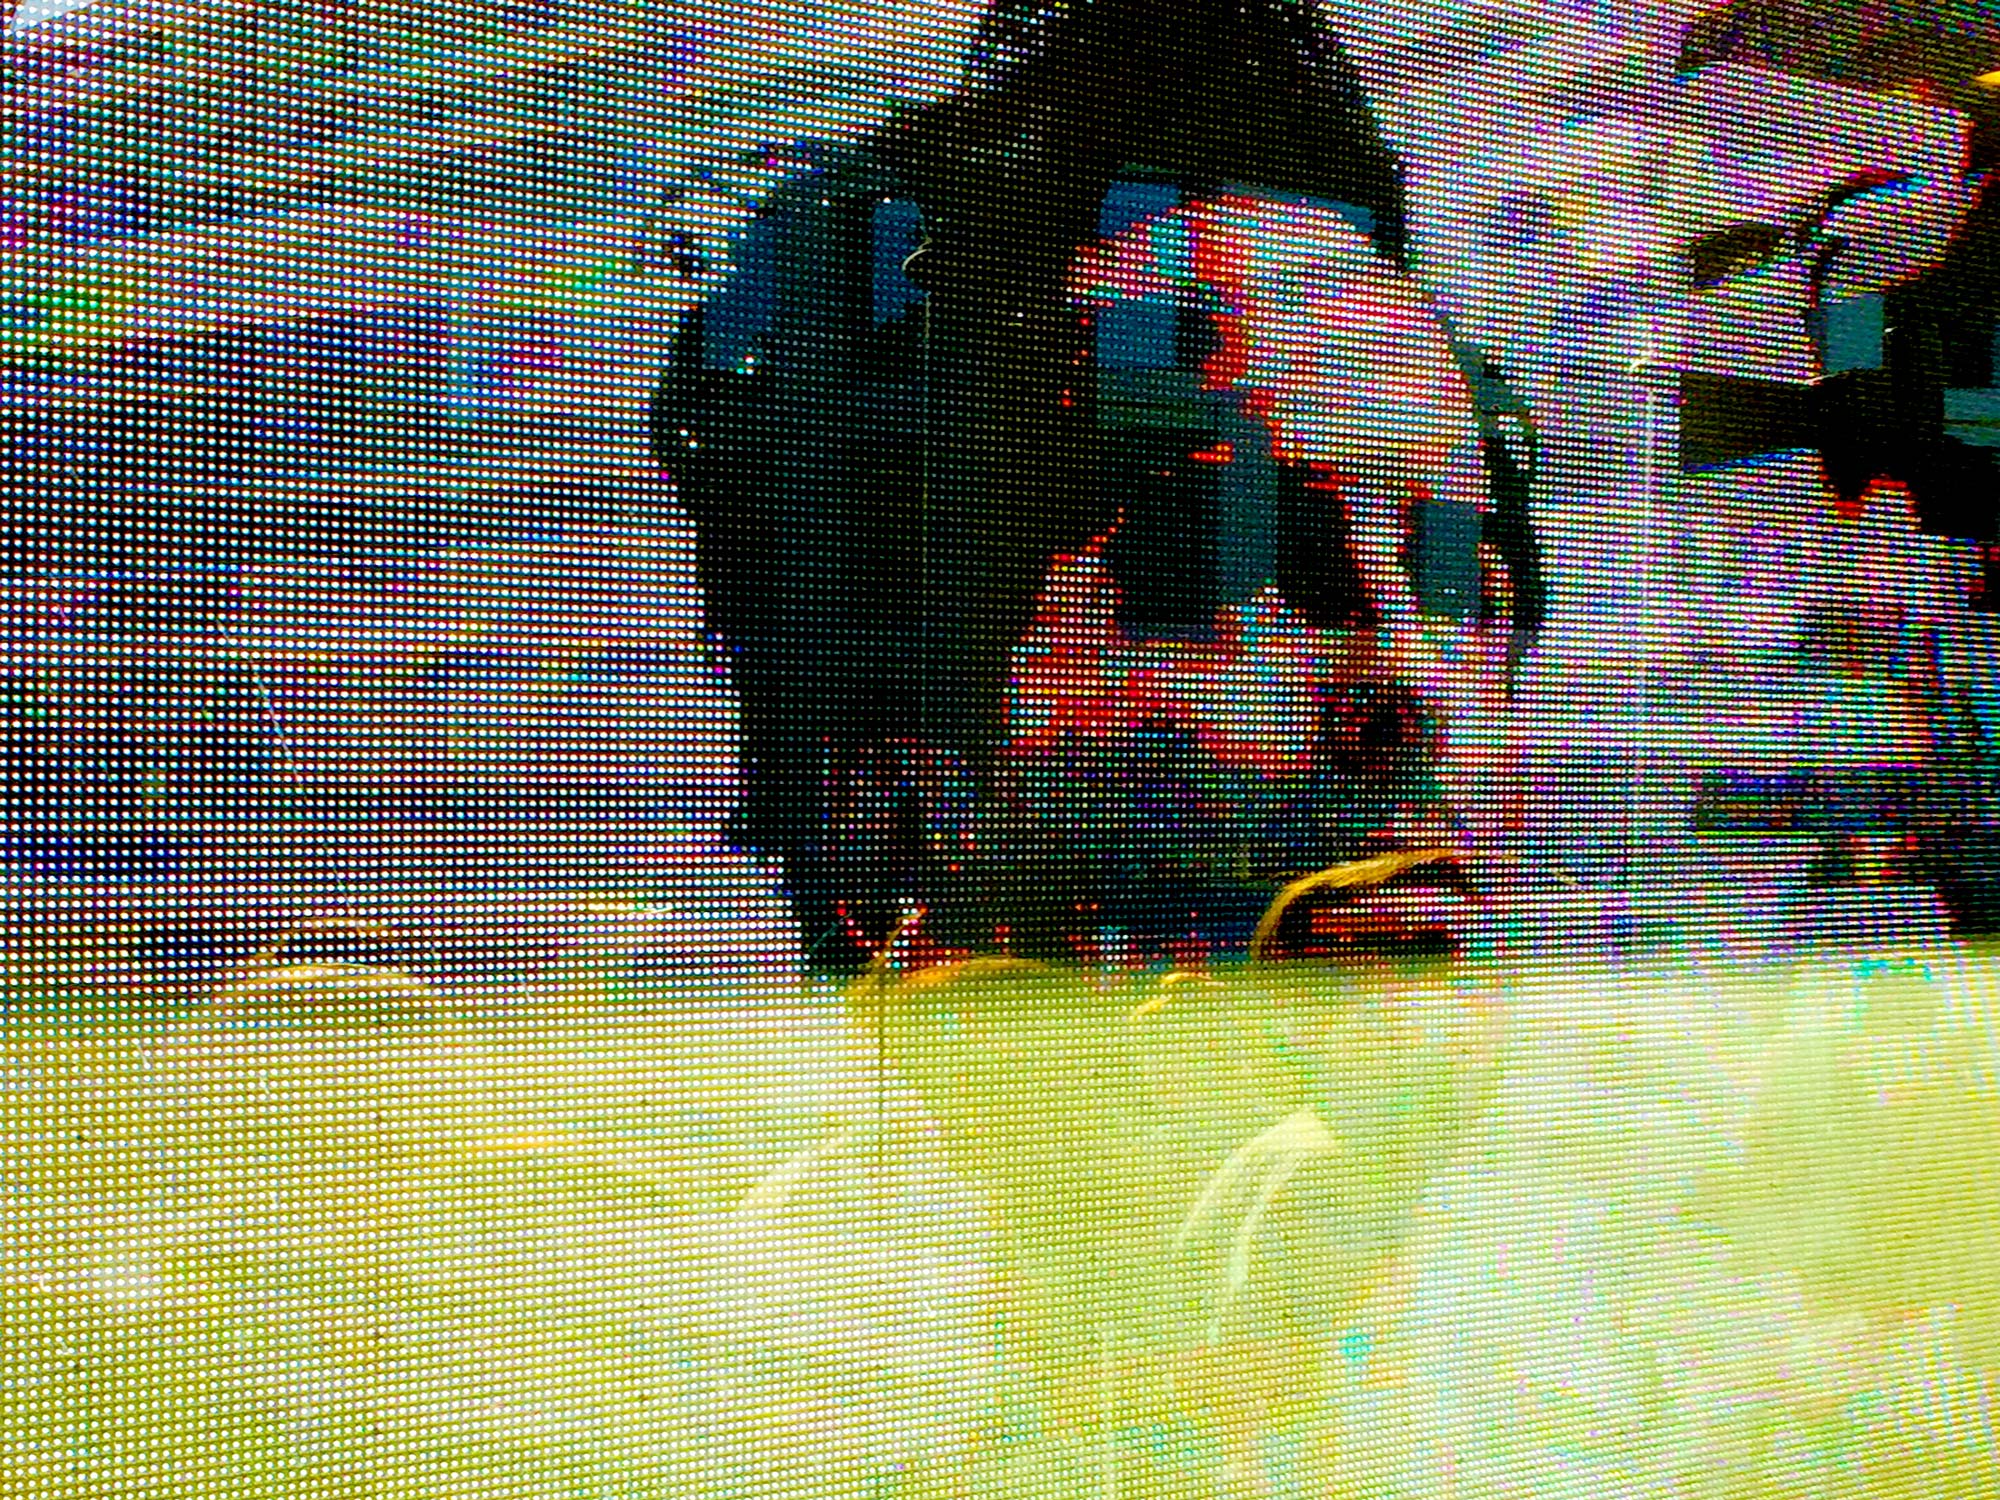 A digital screen shows the distressed image of a man's face.